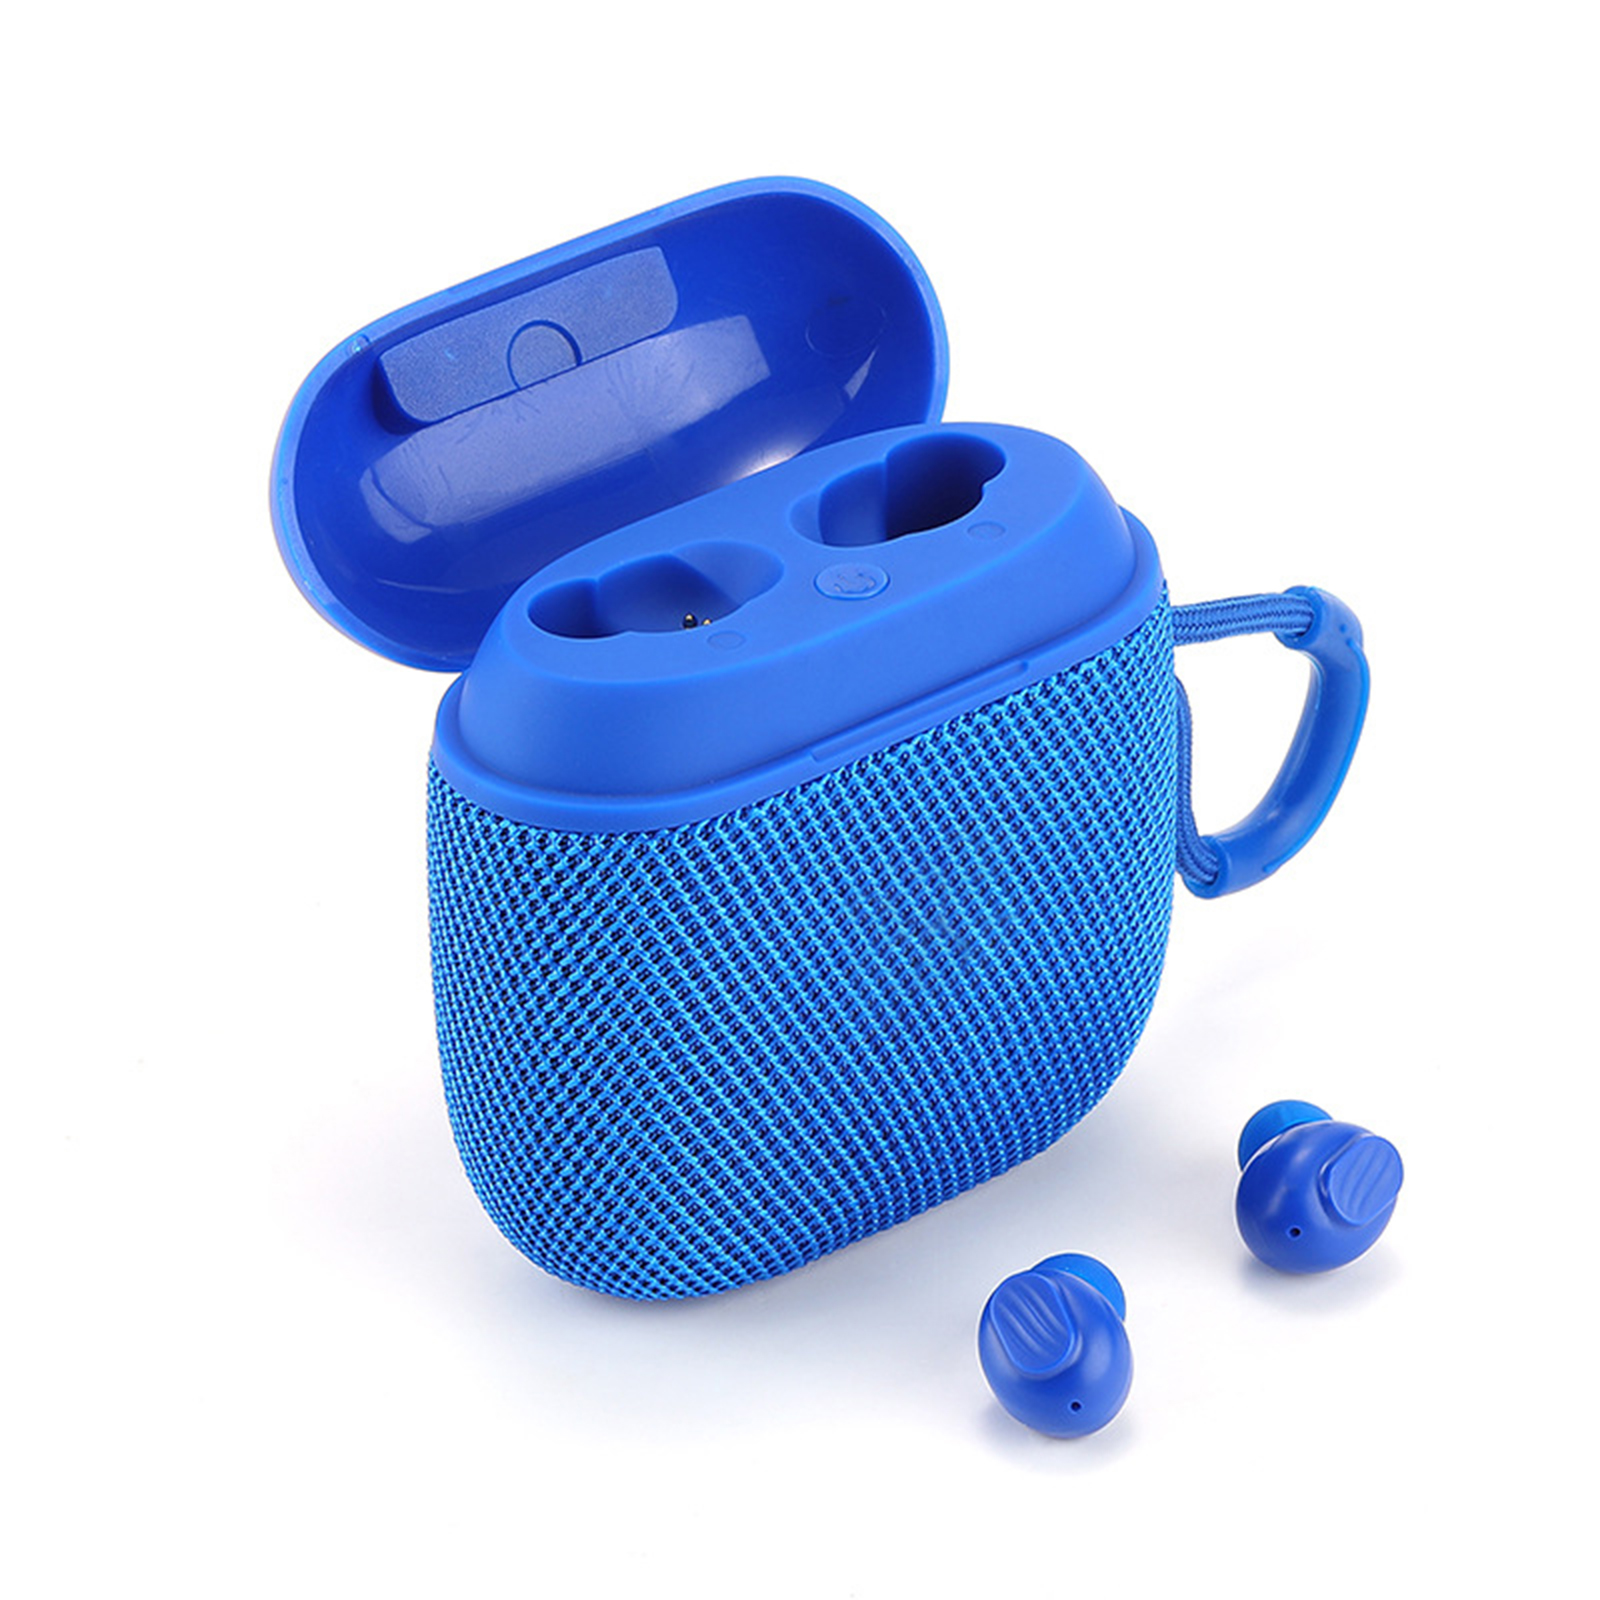 TG809 2 In 1 Portable Wireless Speaker Earbuds Combo Mini Surround Stereo Sound With Earbuds For Home Party Outdoor Travel